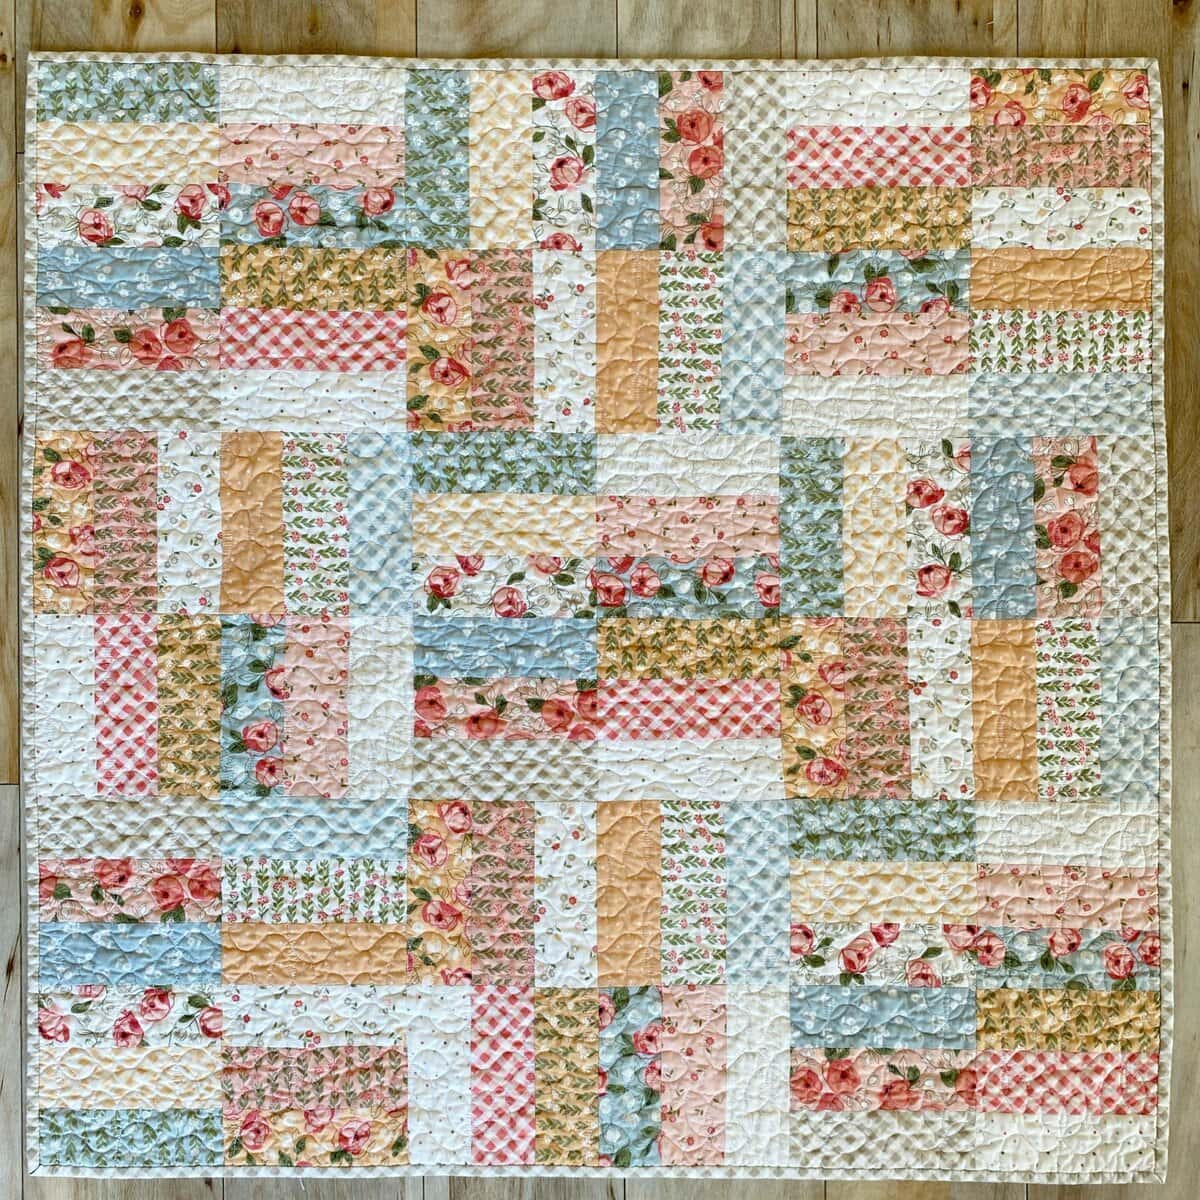 Emily Siddall, Brown Eyed Quilter, highlighted Country Rose by Lella Boutique for Moda Fabrics in this Jelly Roll Jam Quilt